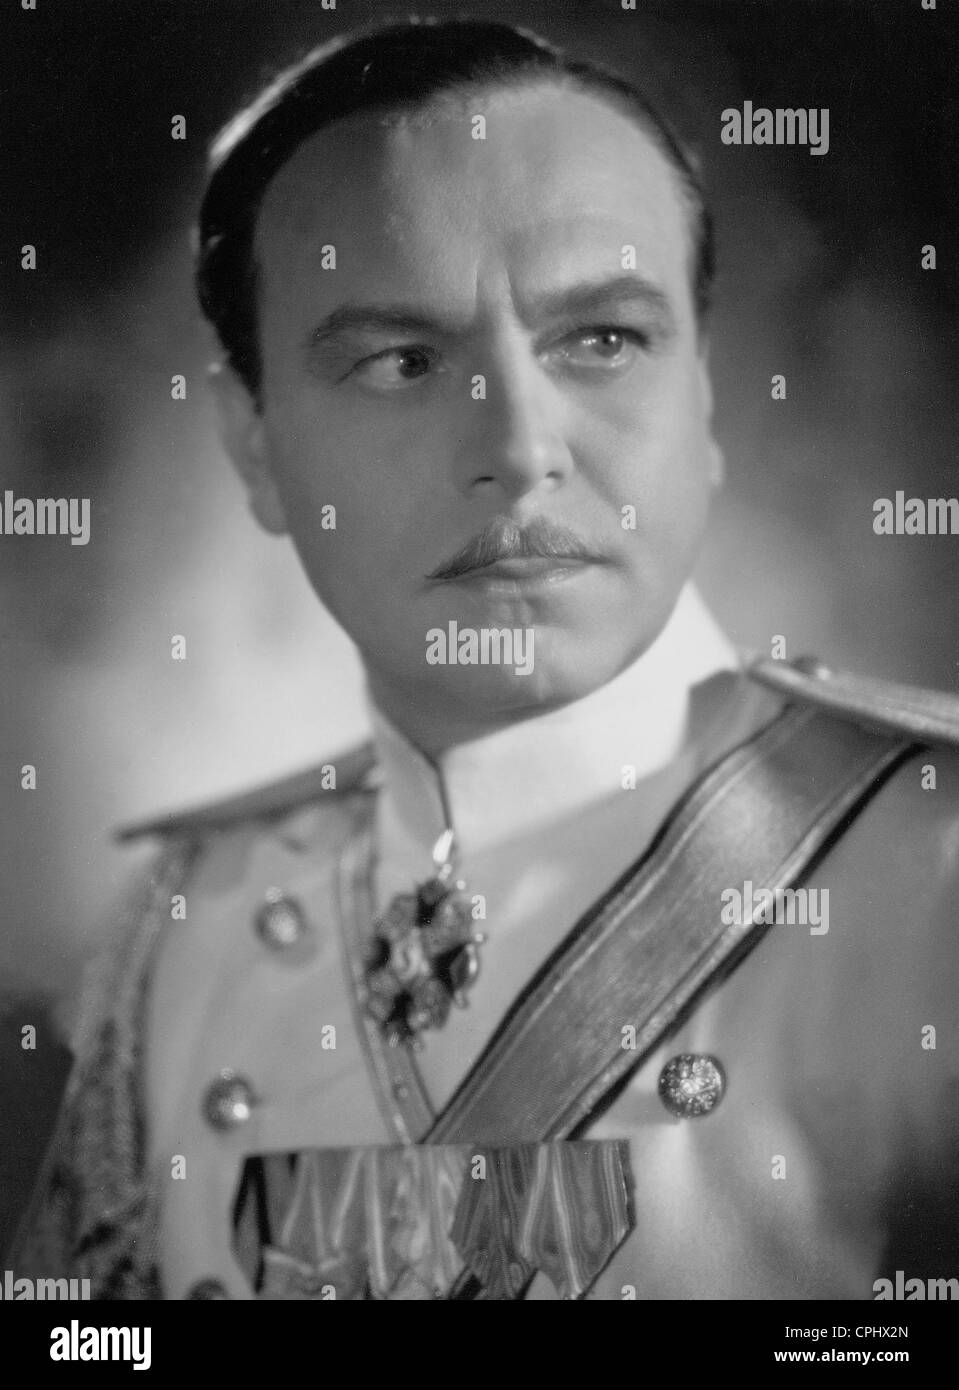 Paul hartmann Black and White Stock Photos & Images - Alamy